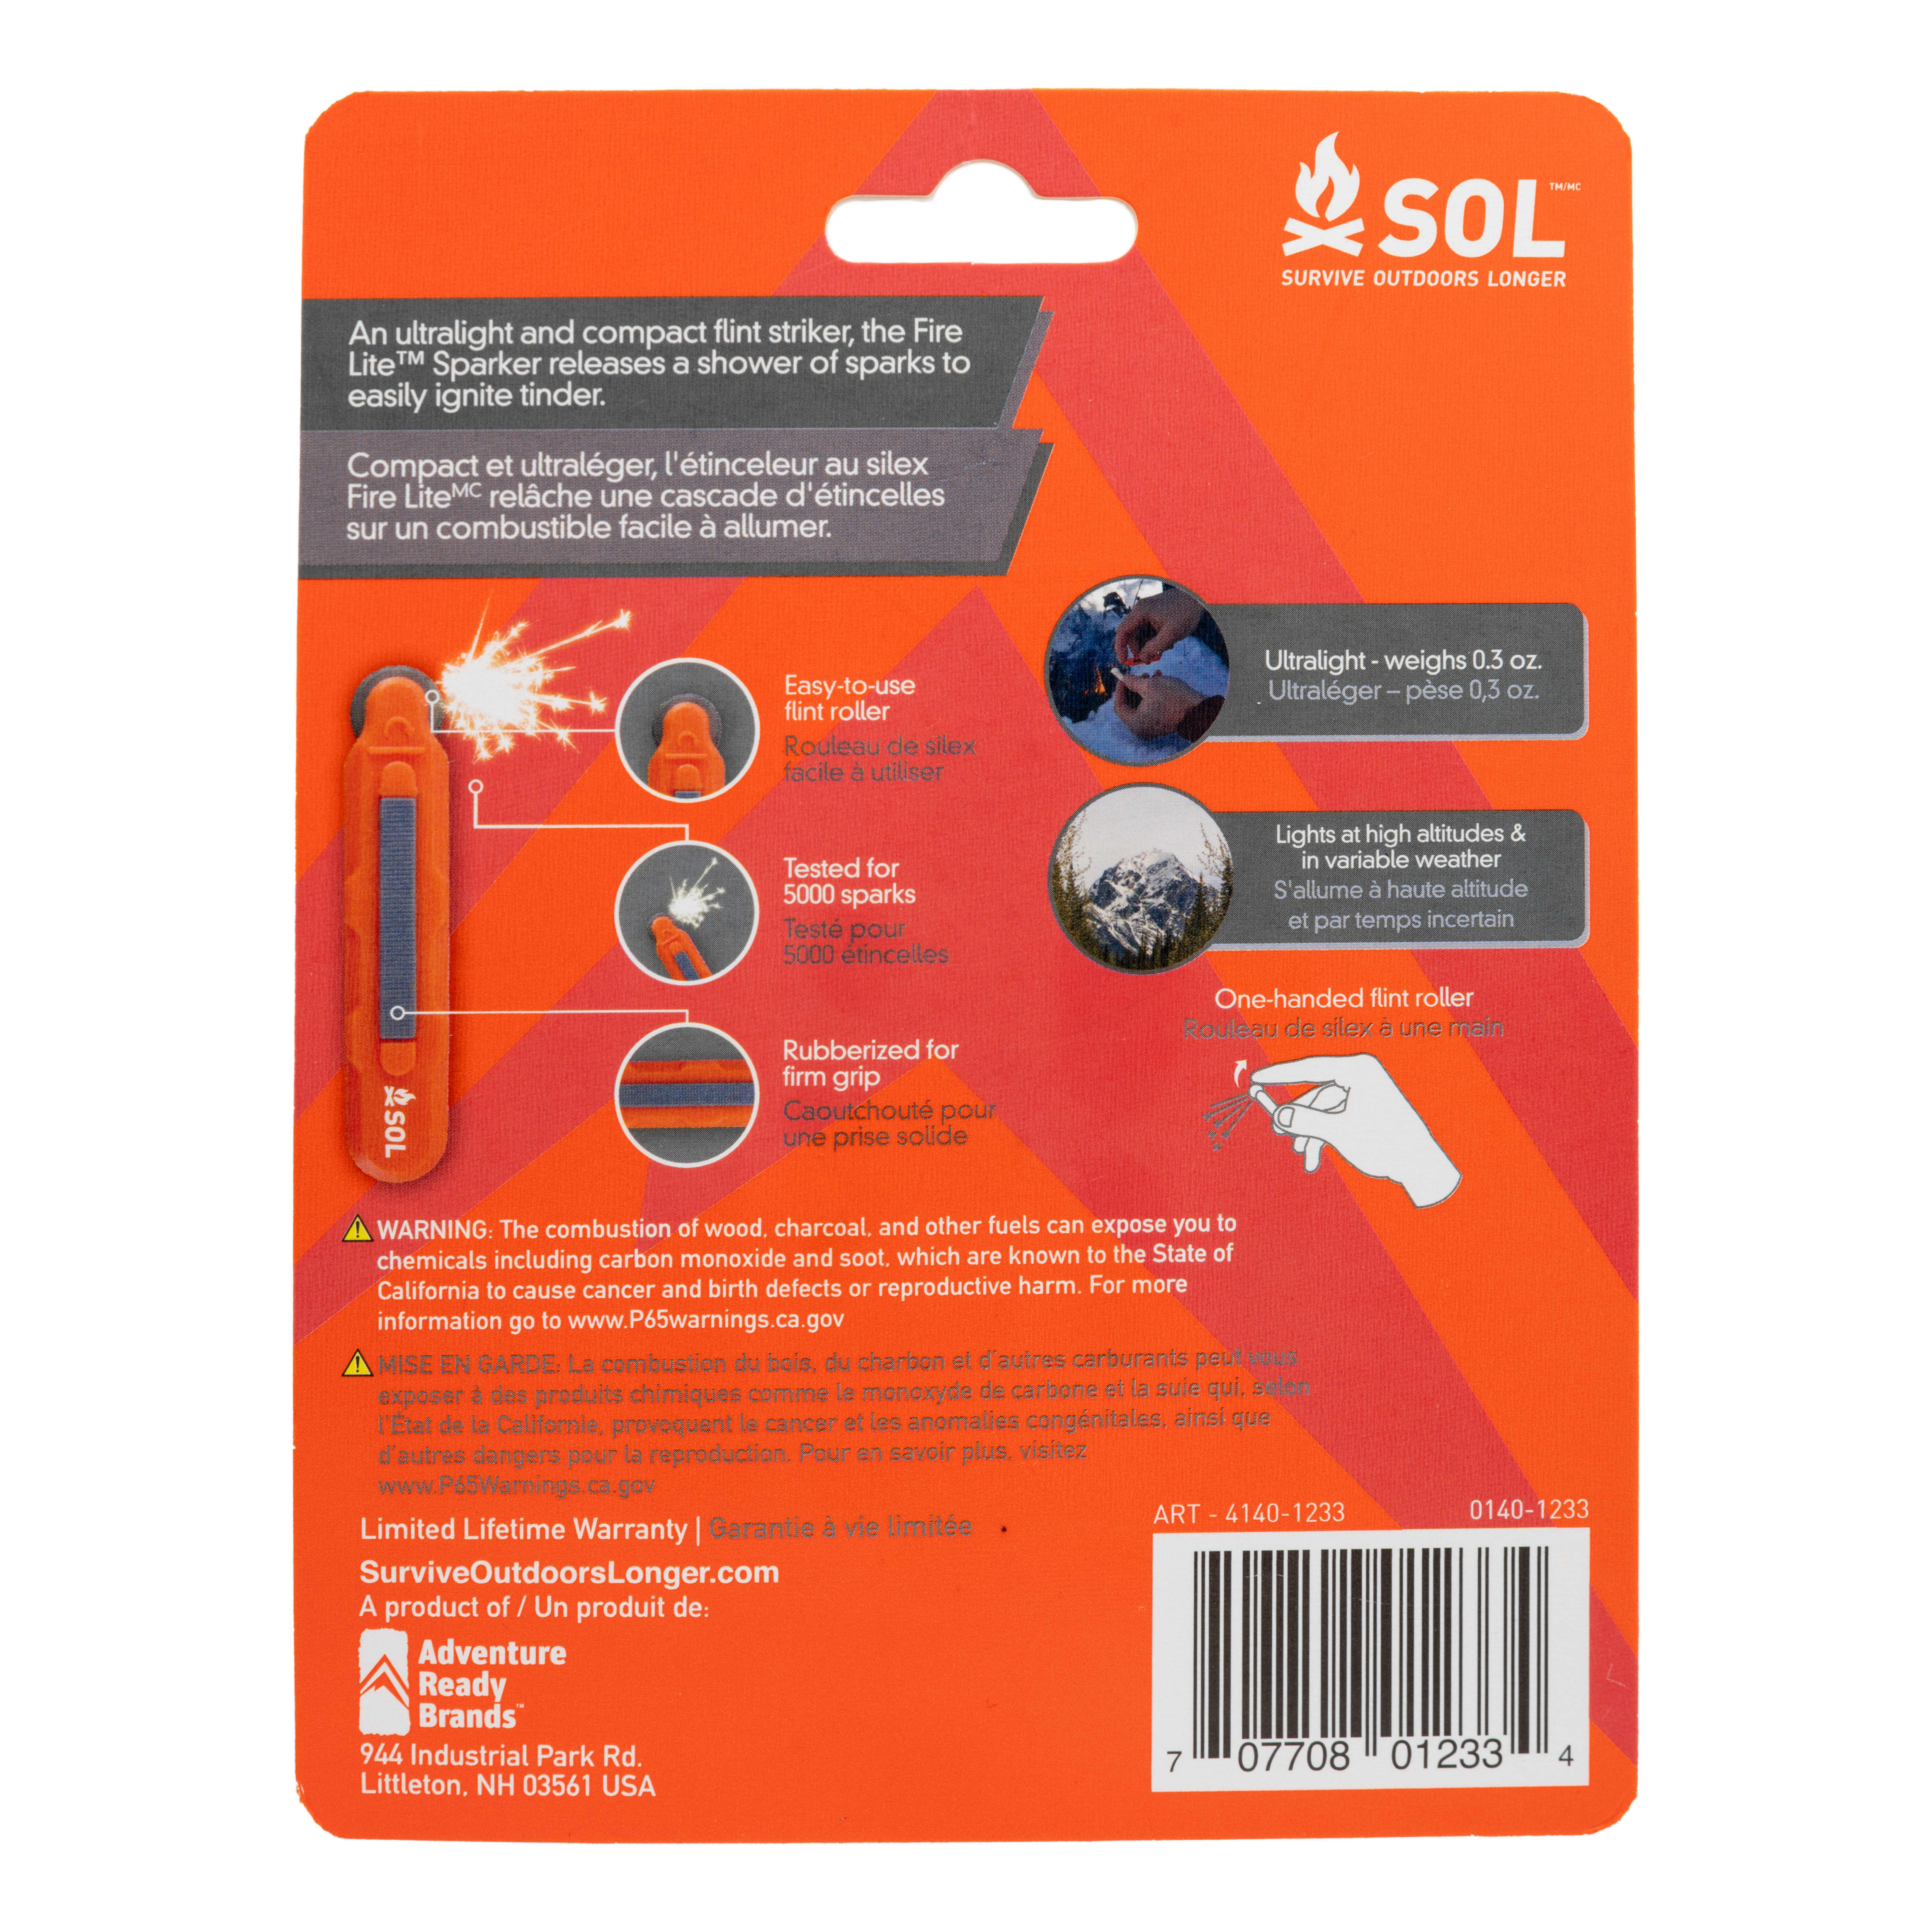 S.O.L.® Fire Lite™ Micro Sparker - 2 Pack